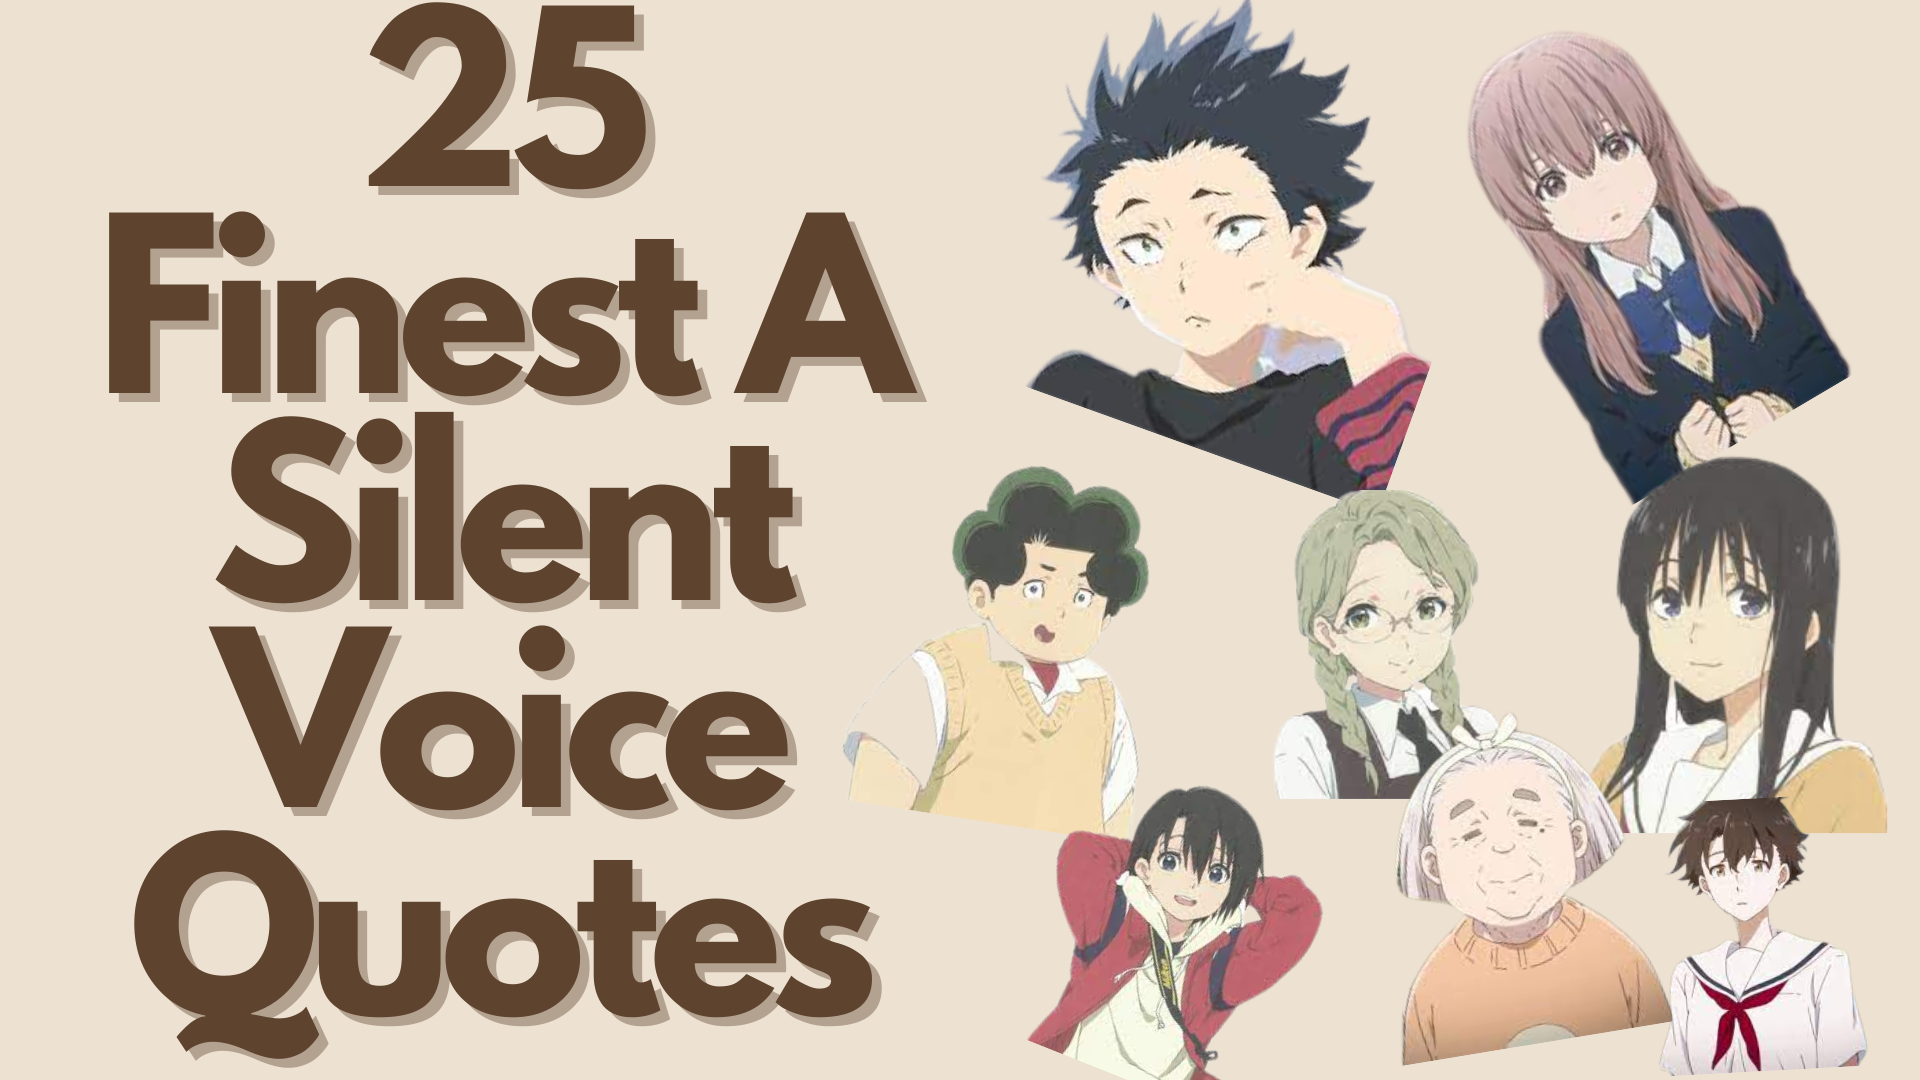 25 Finest A Silent Voice Quotes - Quote Collectors Club